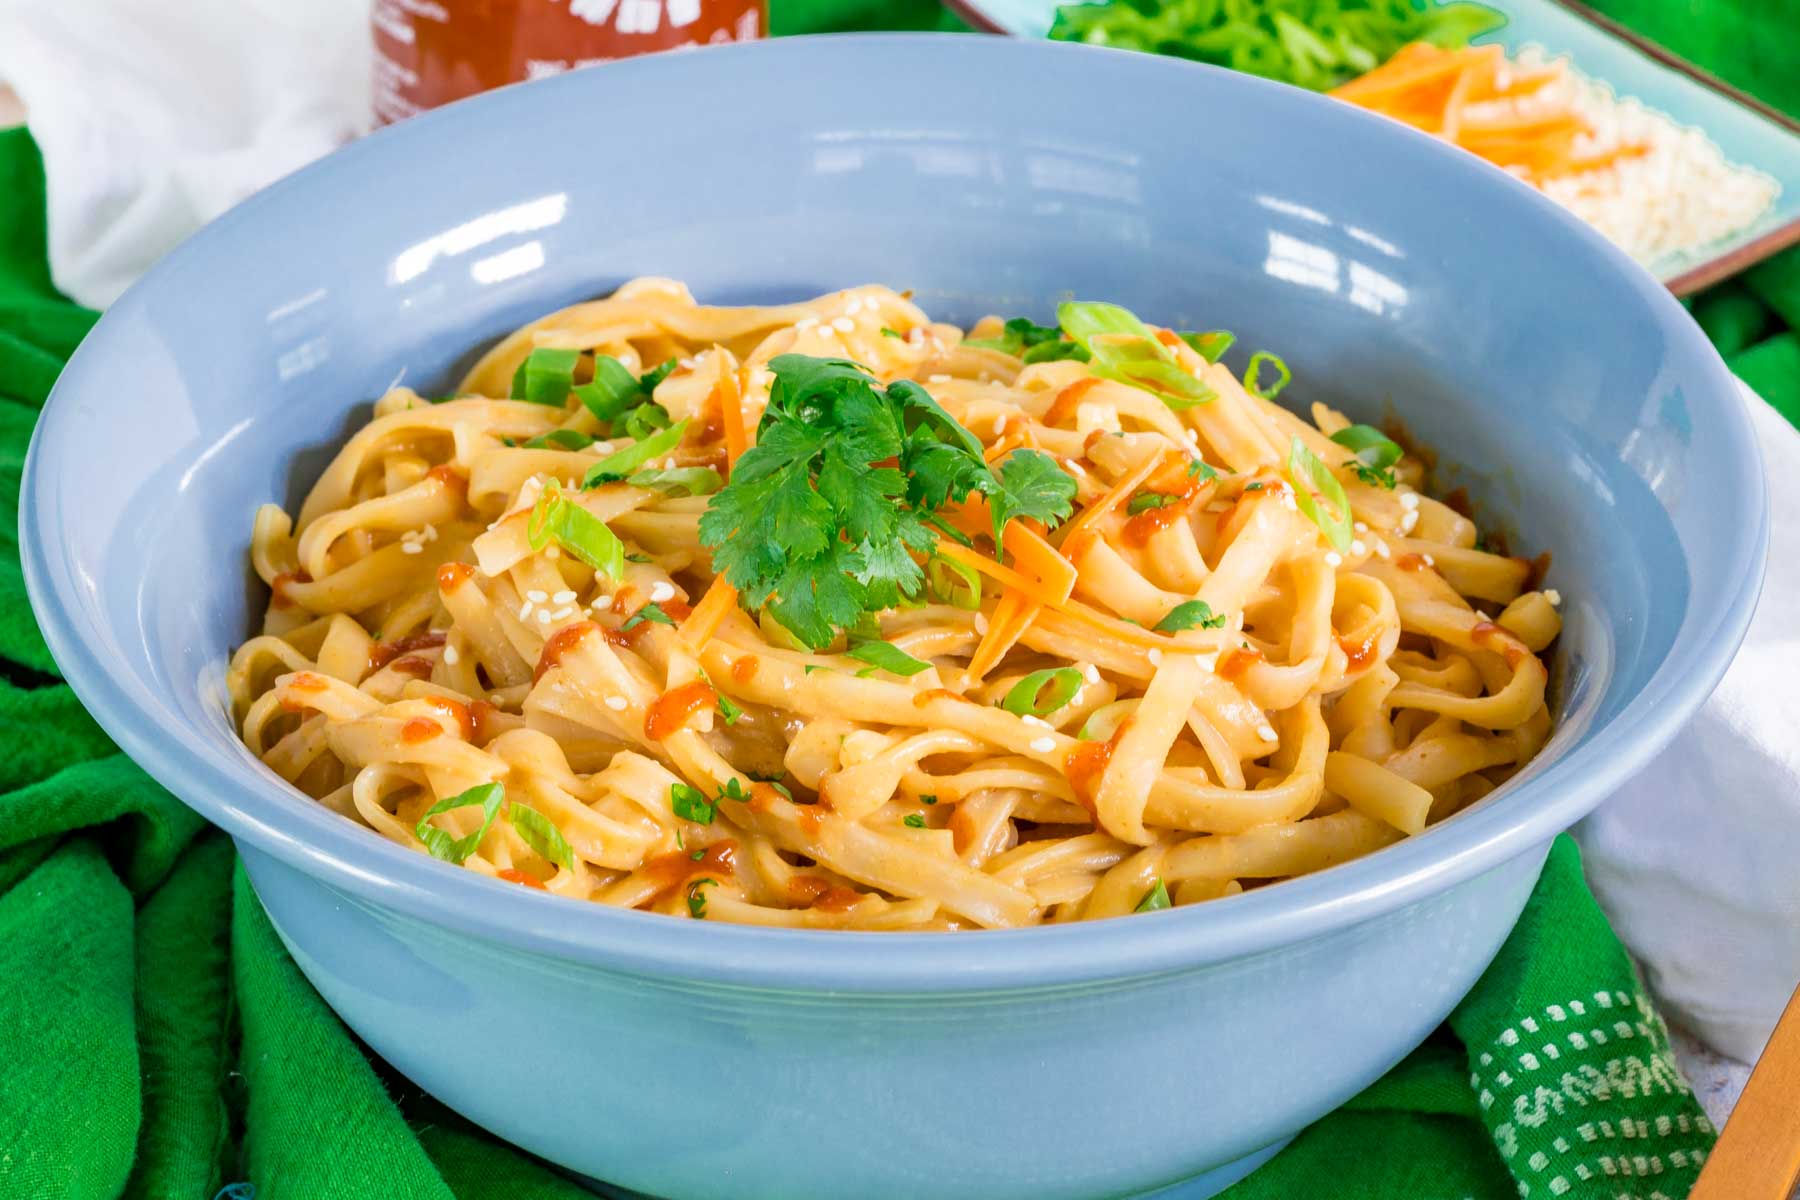 Spicy Sesame Noodles in a bowl with chopped and shredded vegetables as garnish.